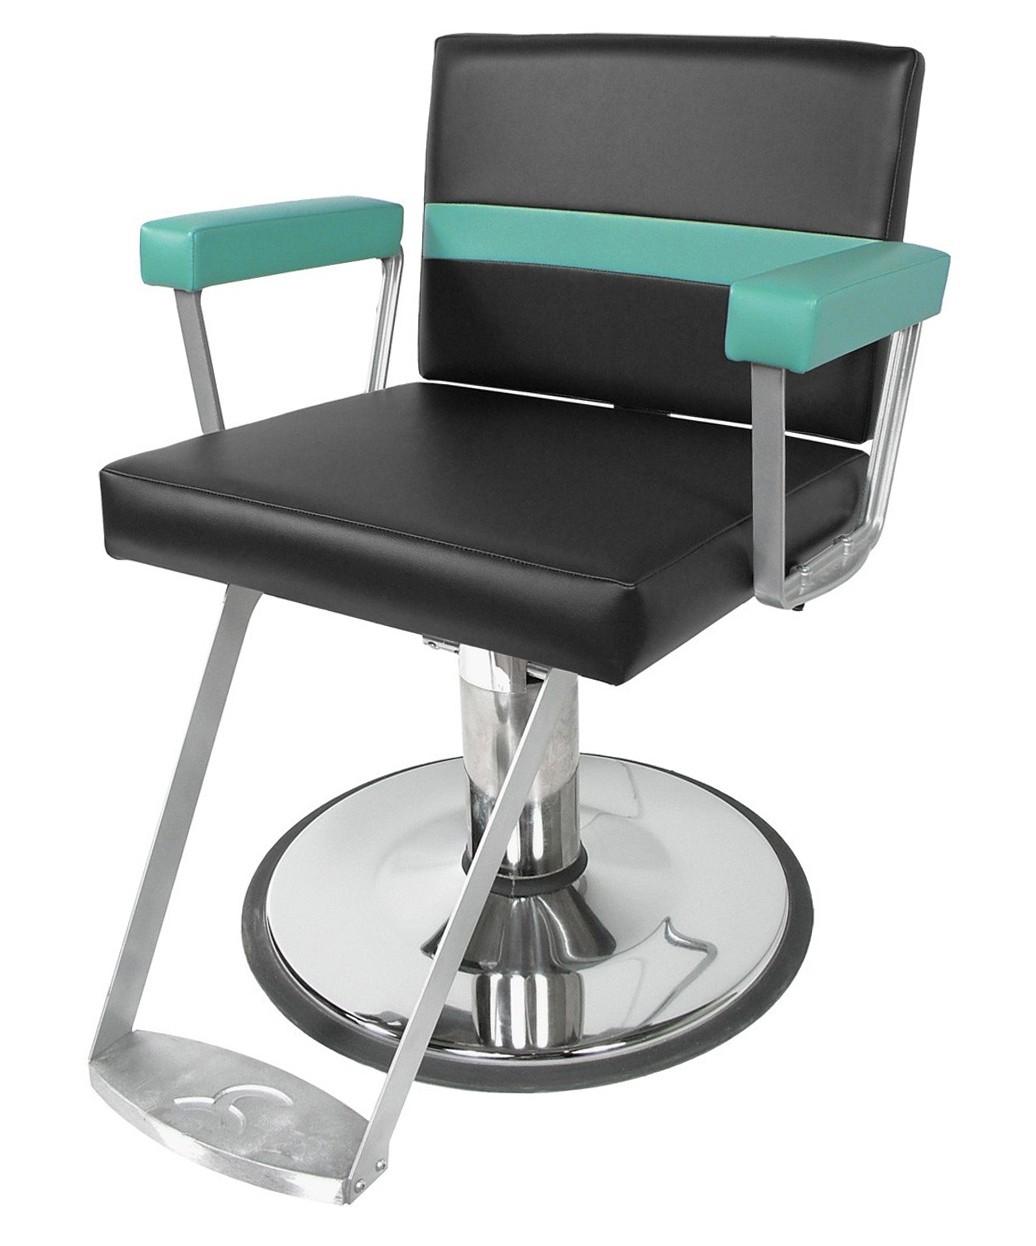 Collins 9800 Taress Styling Chair